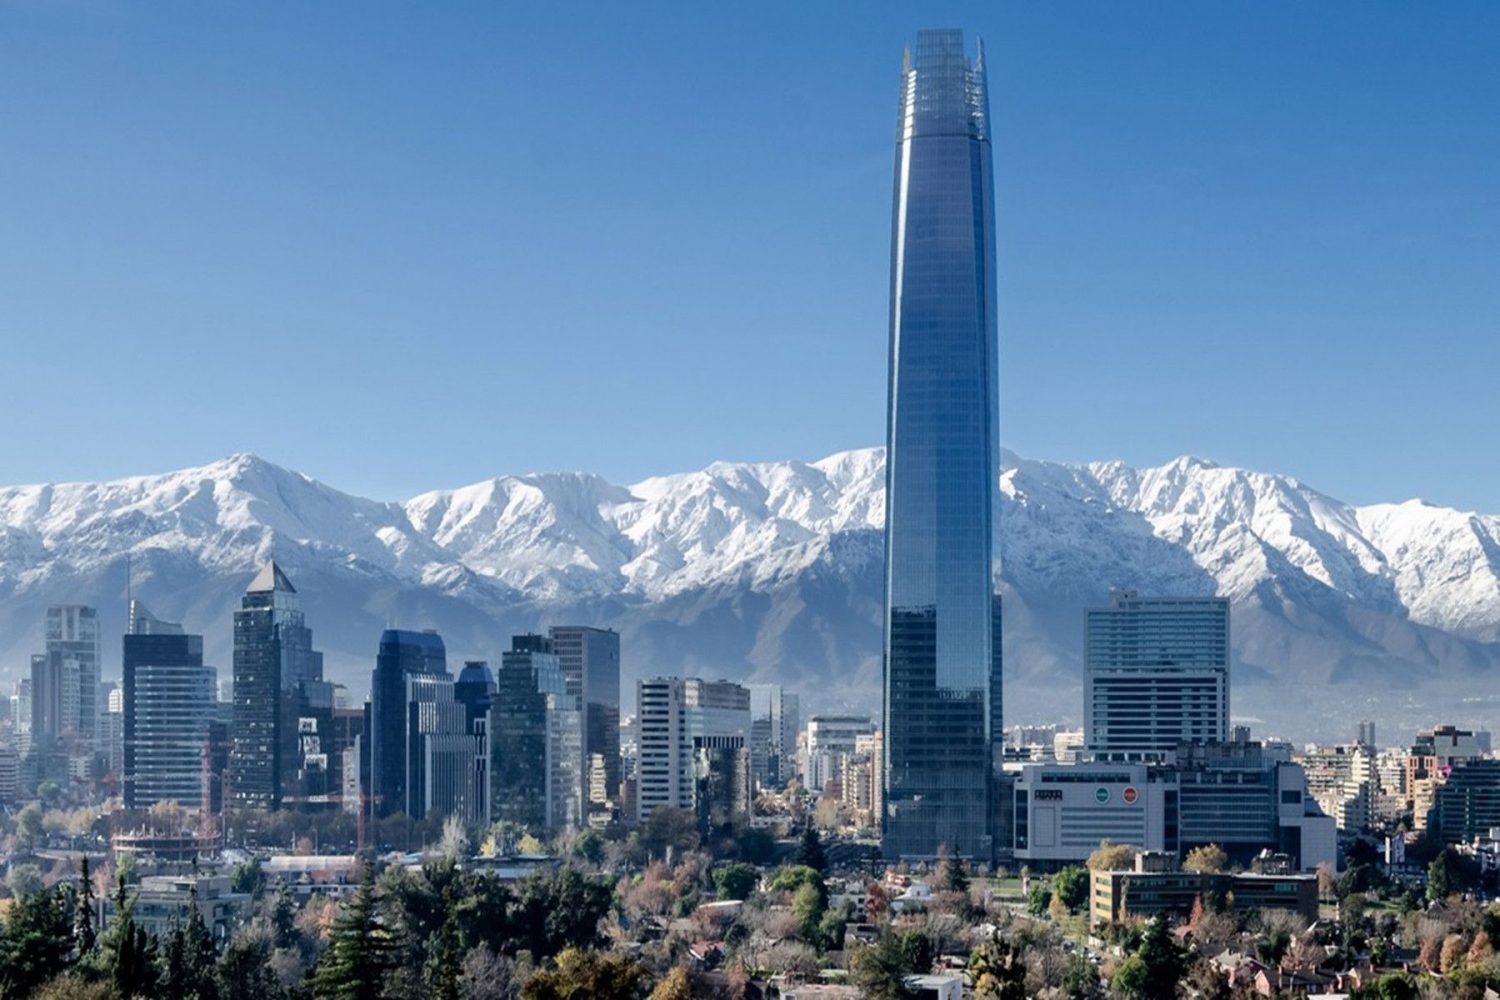 Santiago de Chile and the Andes Mountains